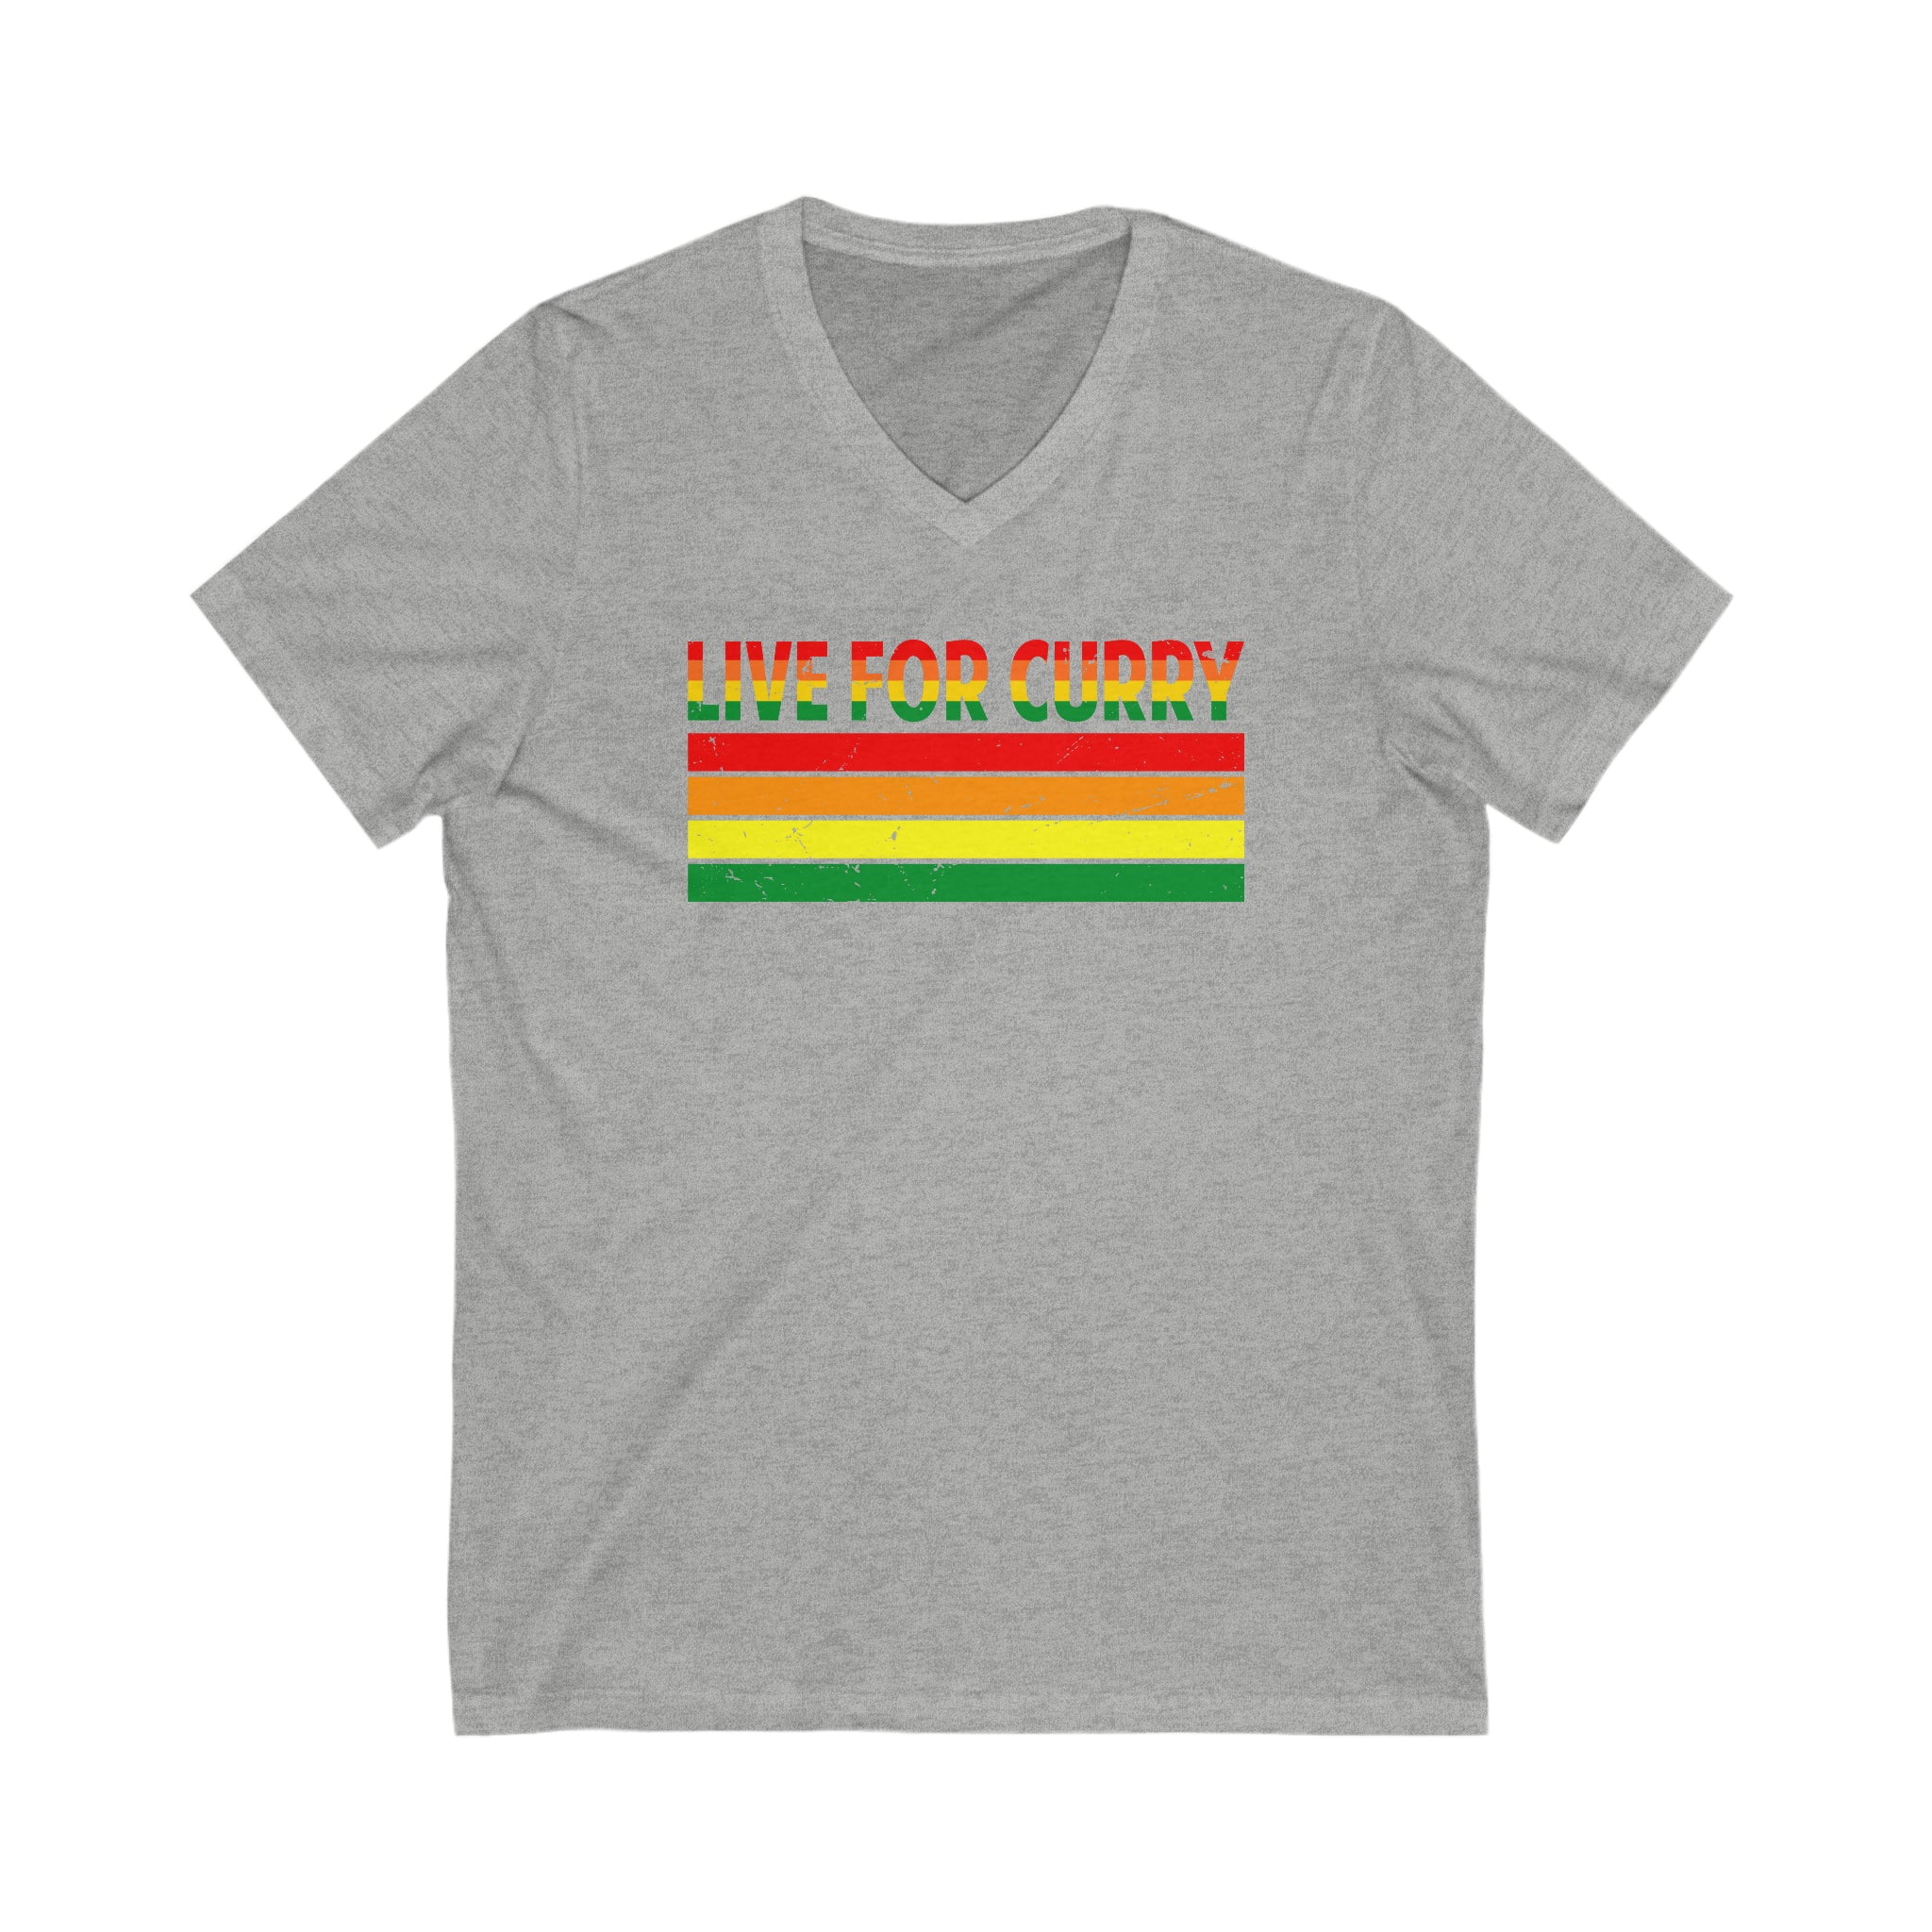 Live for Curry T-Shirt - Spice Up Your Life! - Unisex Jersey Short Sleeve V-Neck Tee